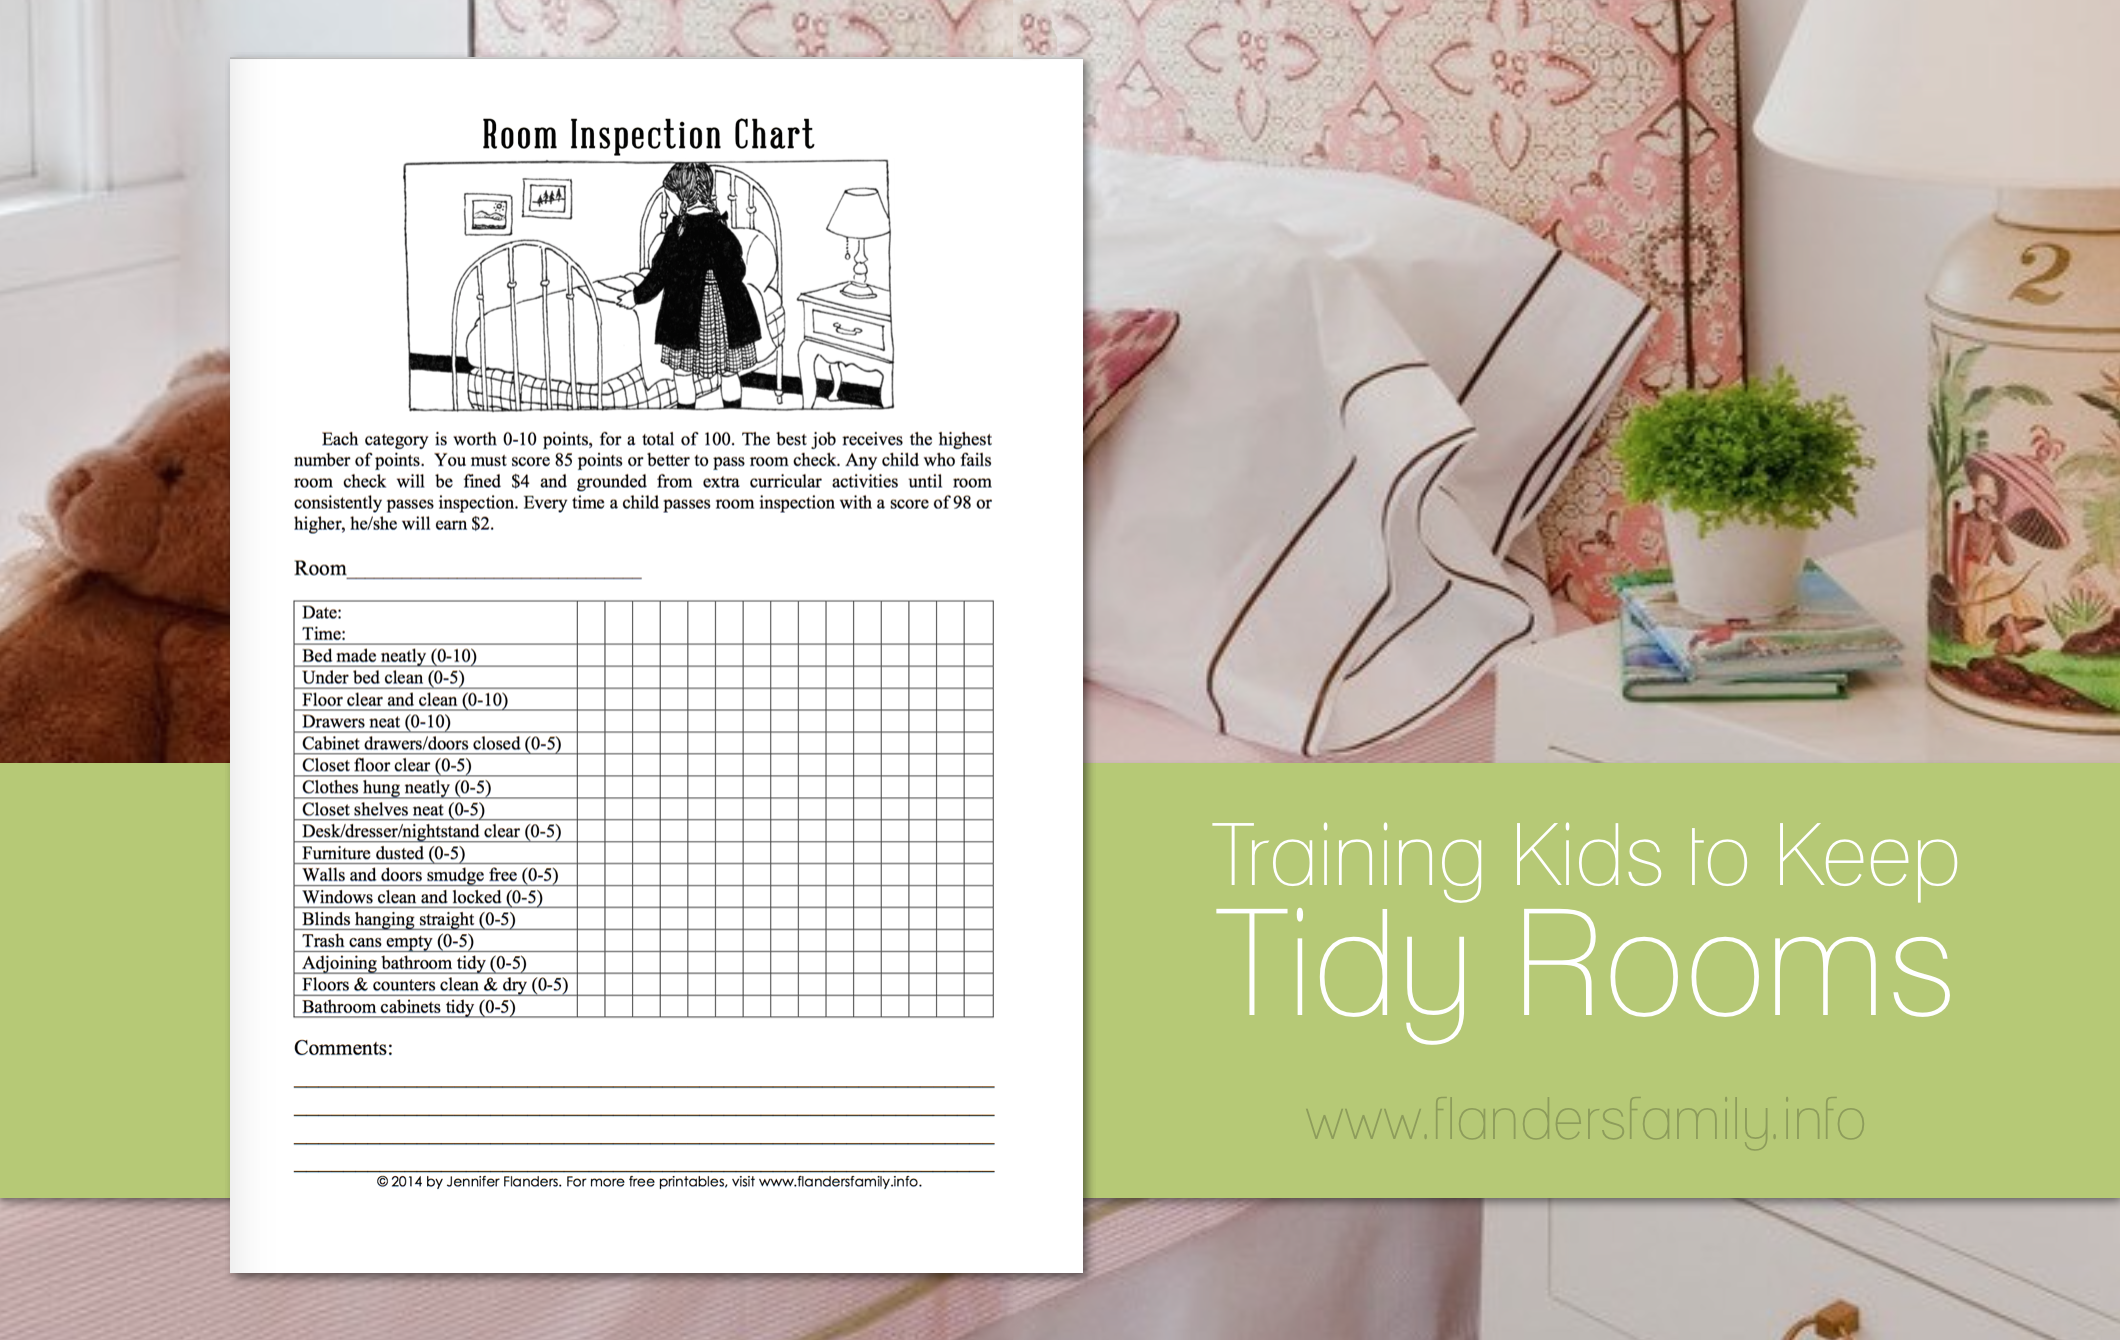 How to Train Kids to Keep Tidy Rooms | free printable inspection chart